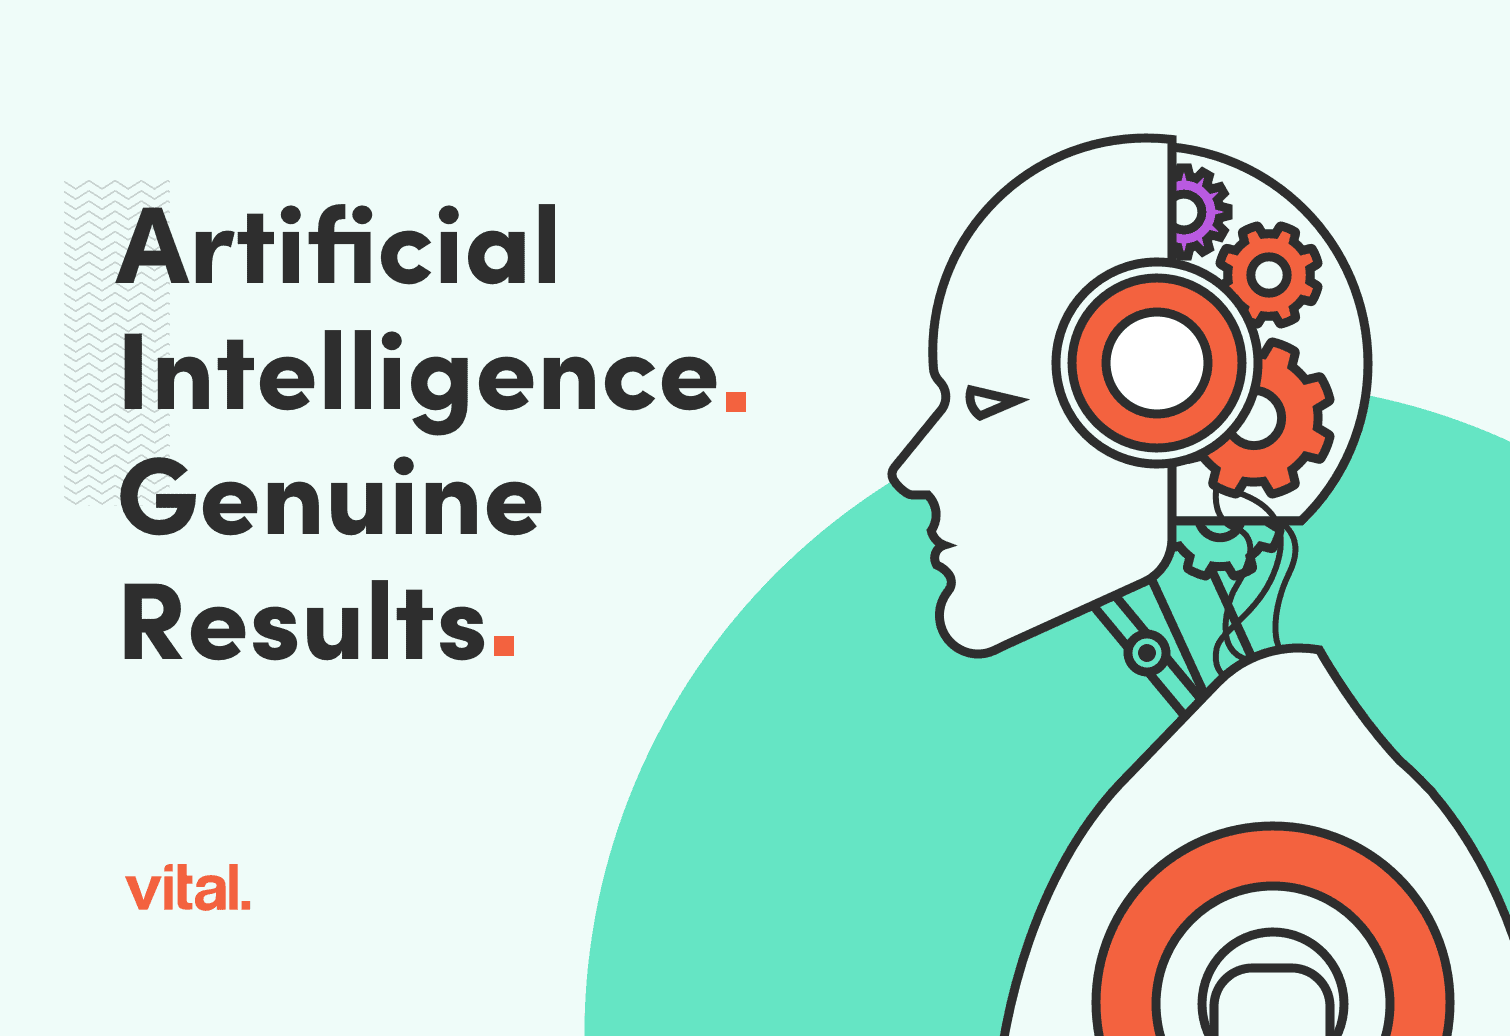 Artificial Intelligence. Genuine Results.